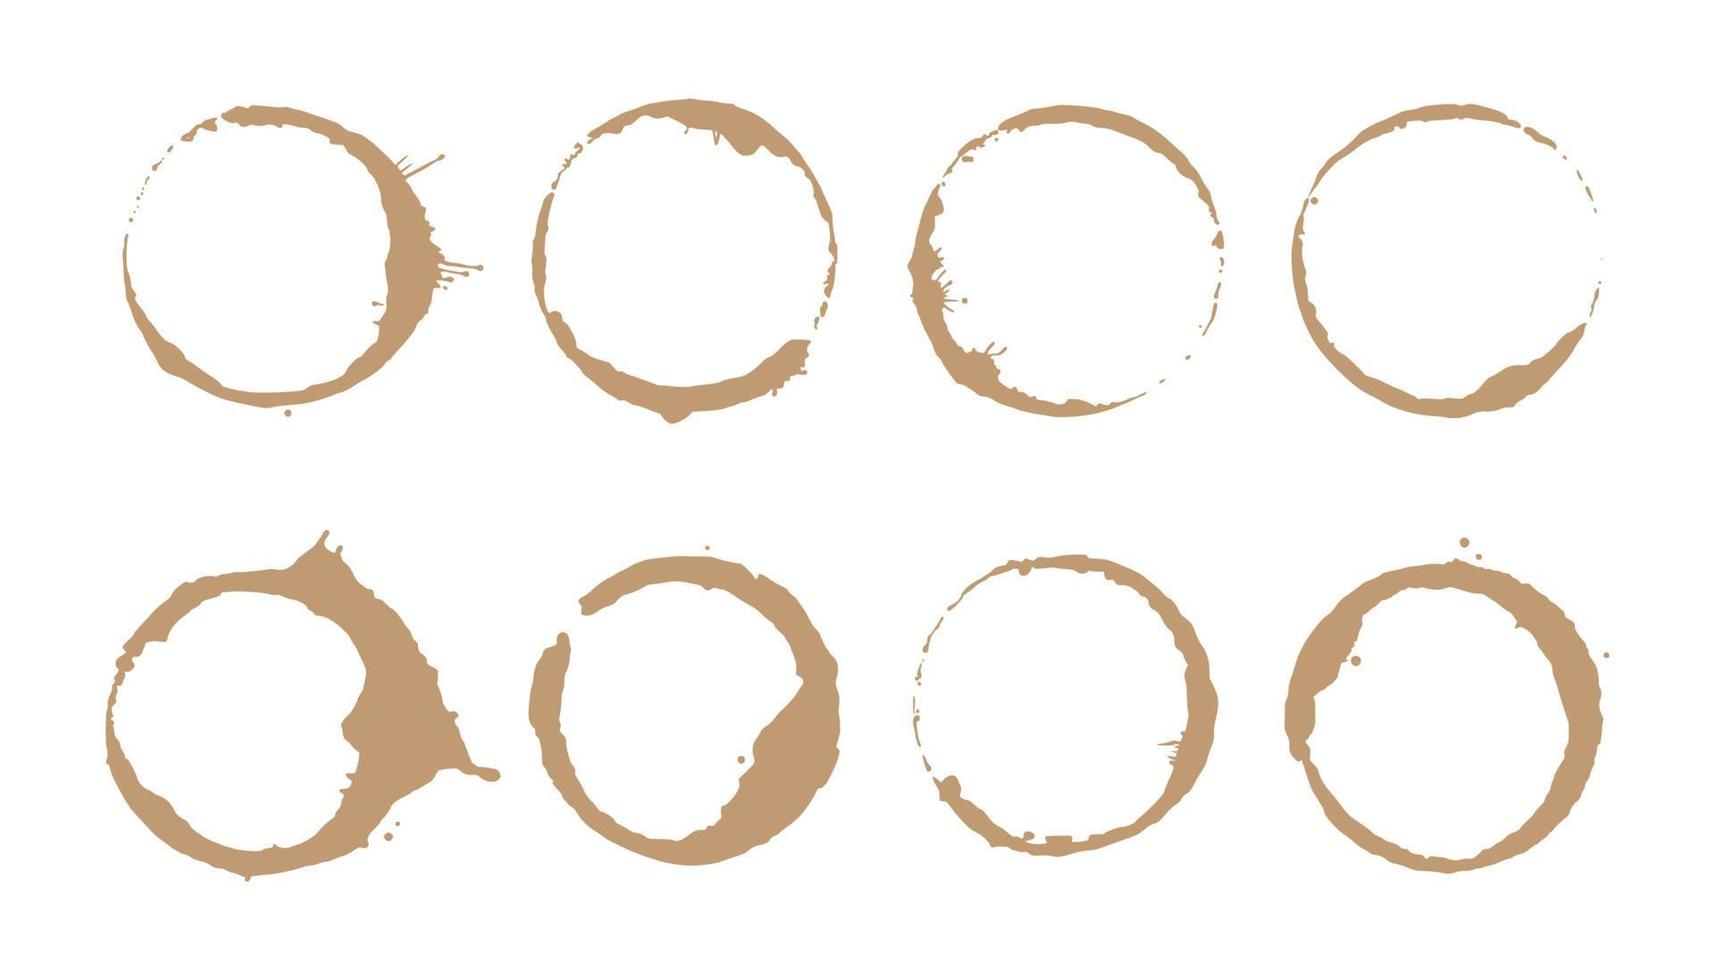 Coffee stain ring set. Vector illustration.